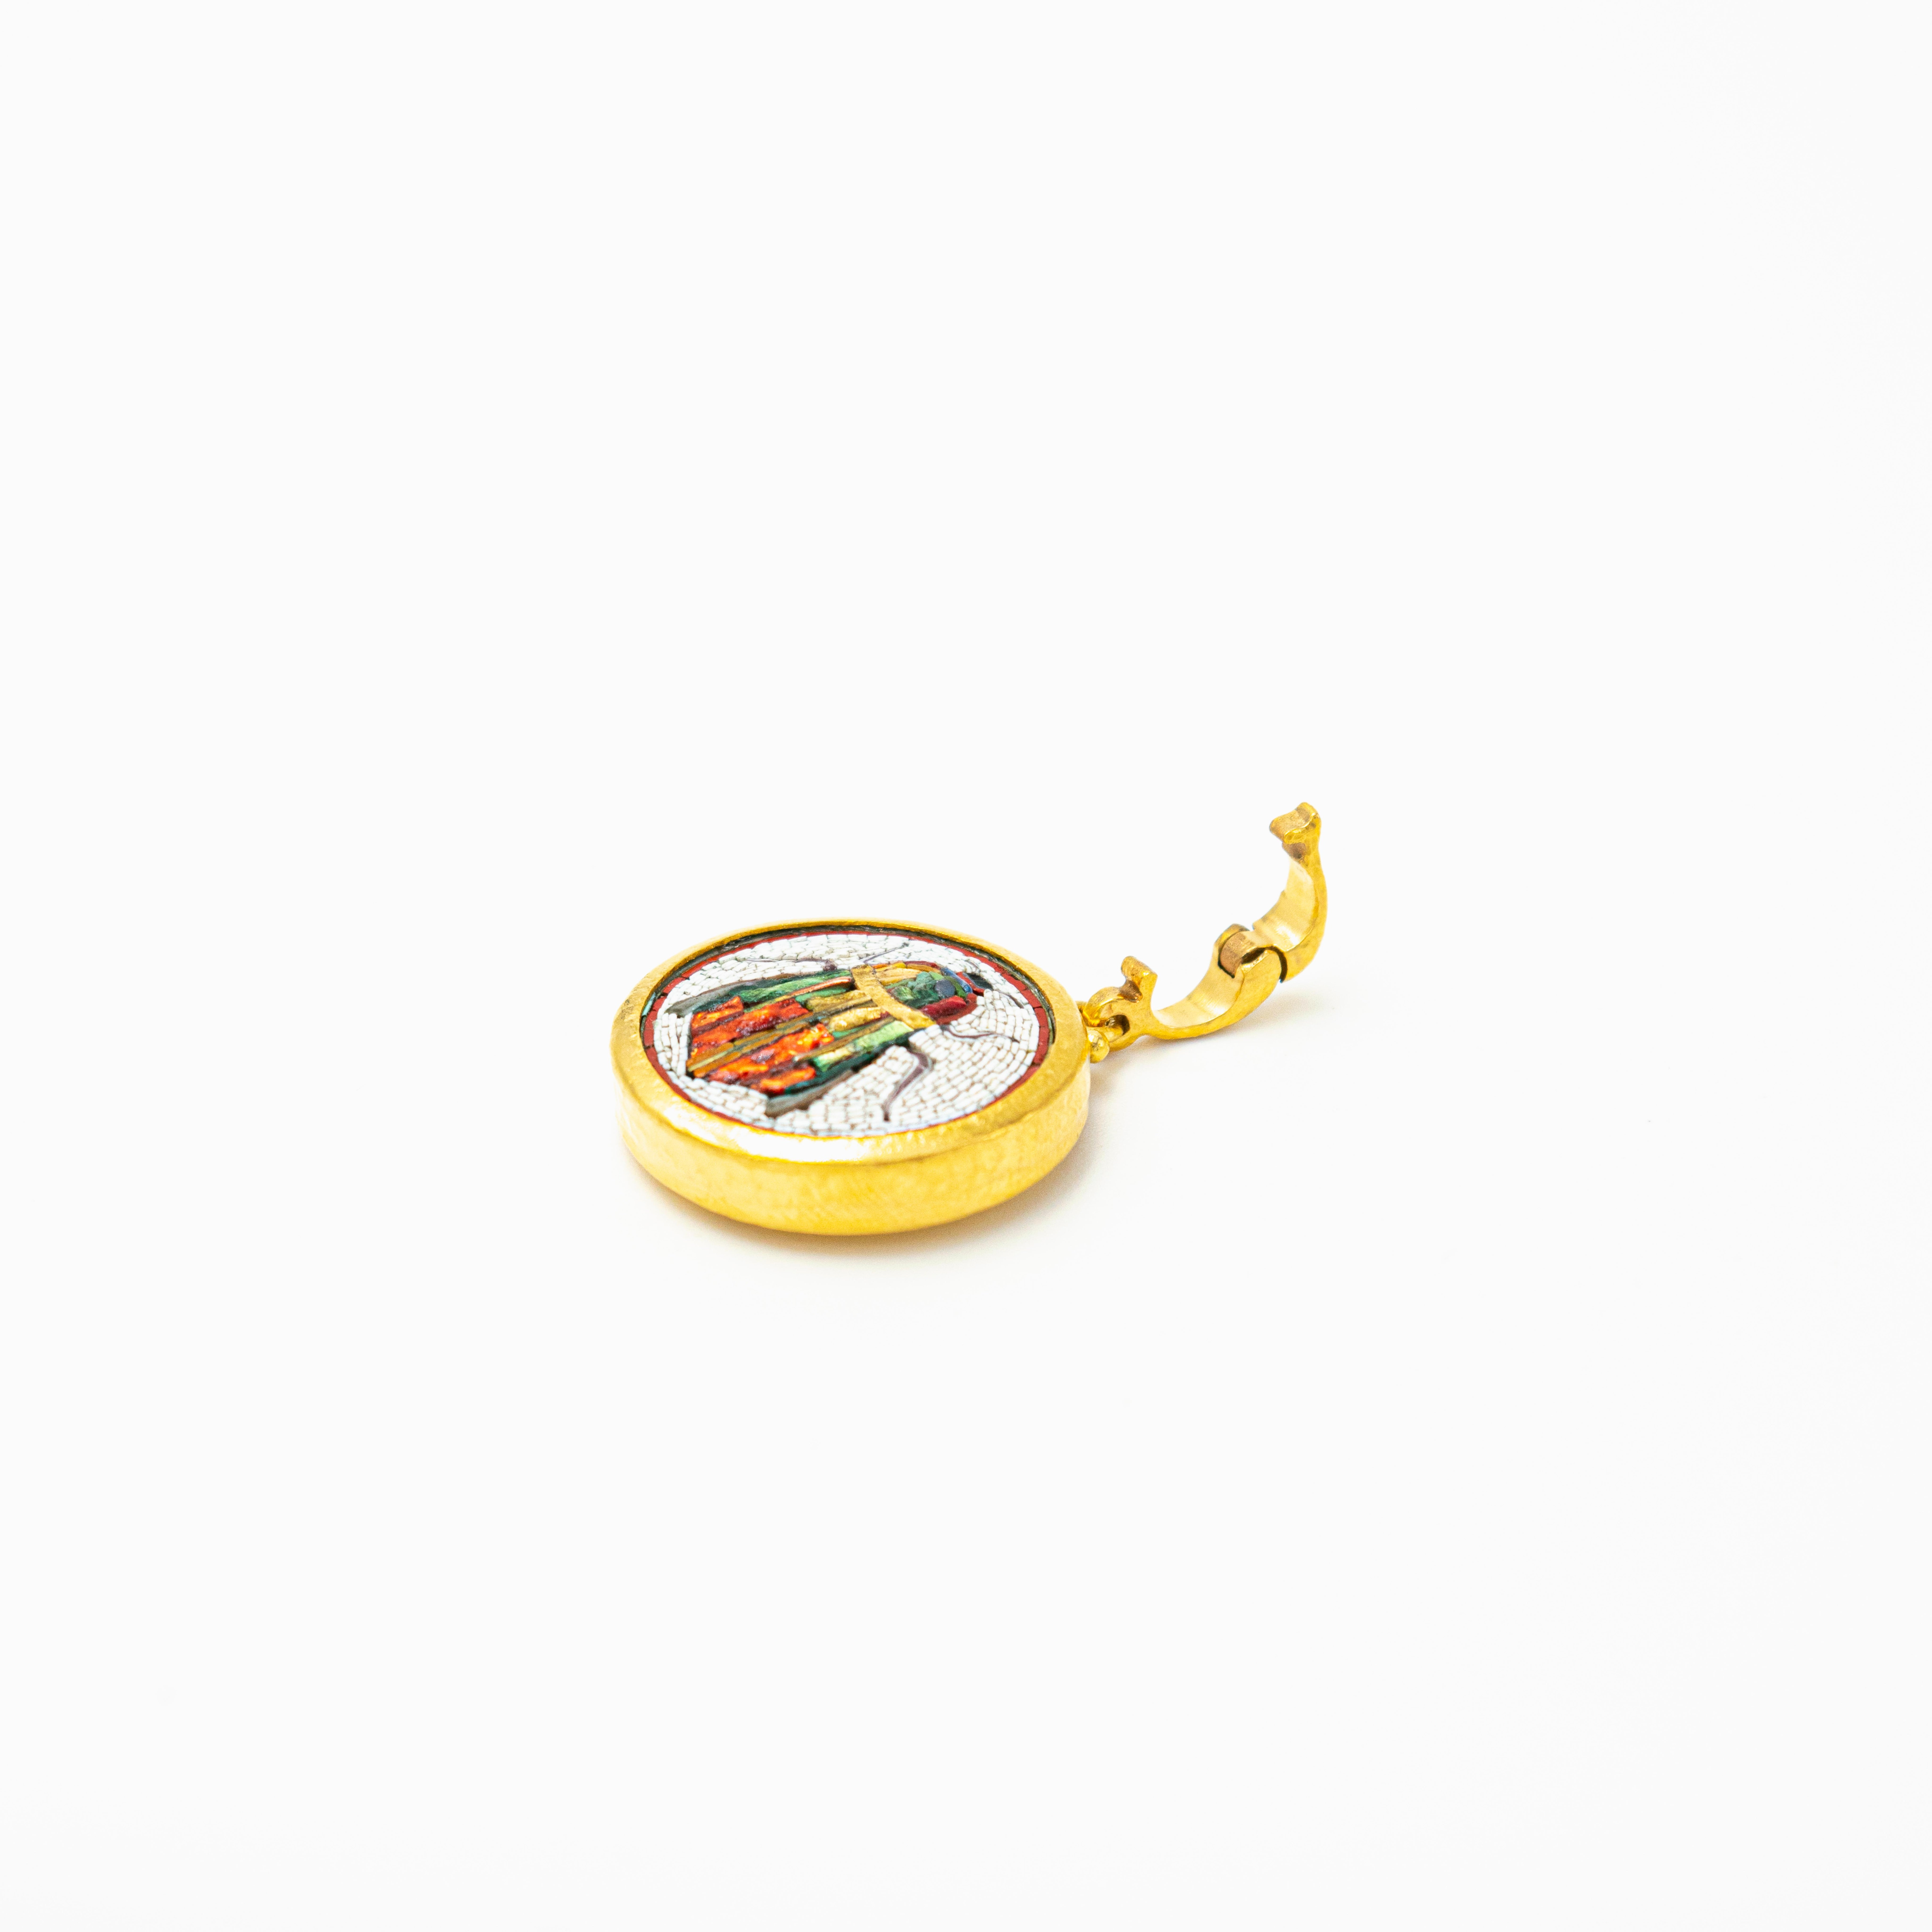 From Gurhan’s remarkable collection of handmade 24k gold treasures, inspired by the sensuality of pure gold, each jewel illuminates the golden warmth of the feminine spirit.

One of a kind mosaic pendant necklace in 24k yellow gold, featuring a 14mm